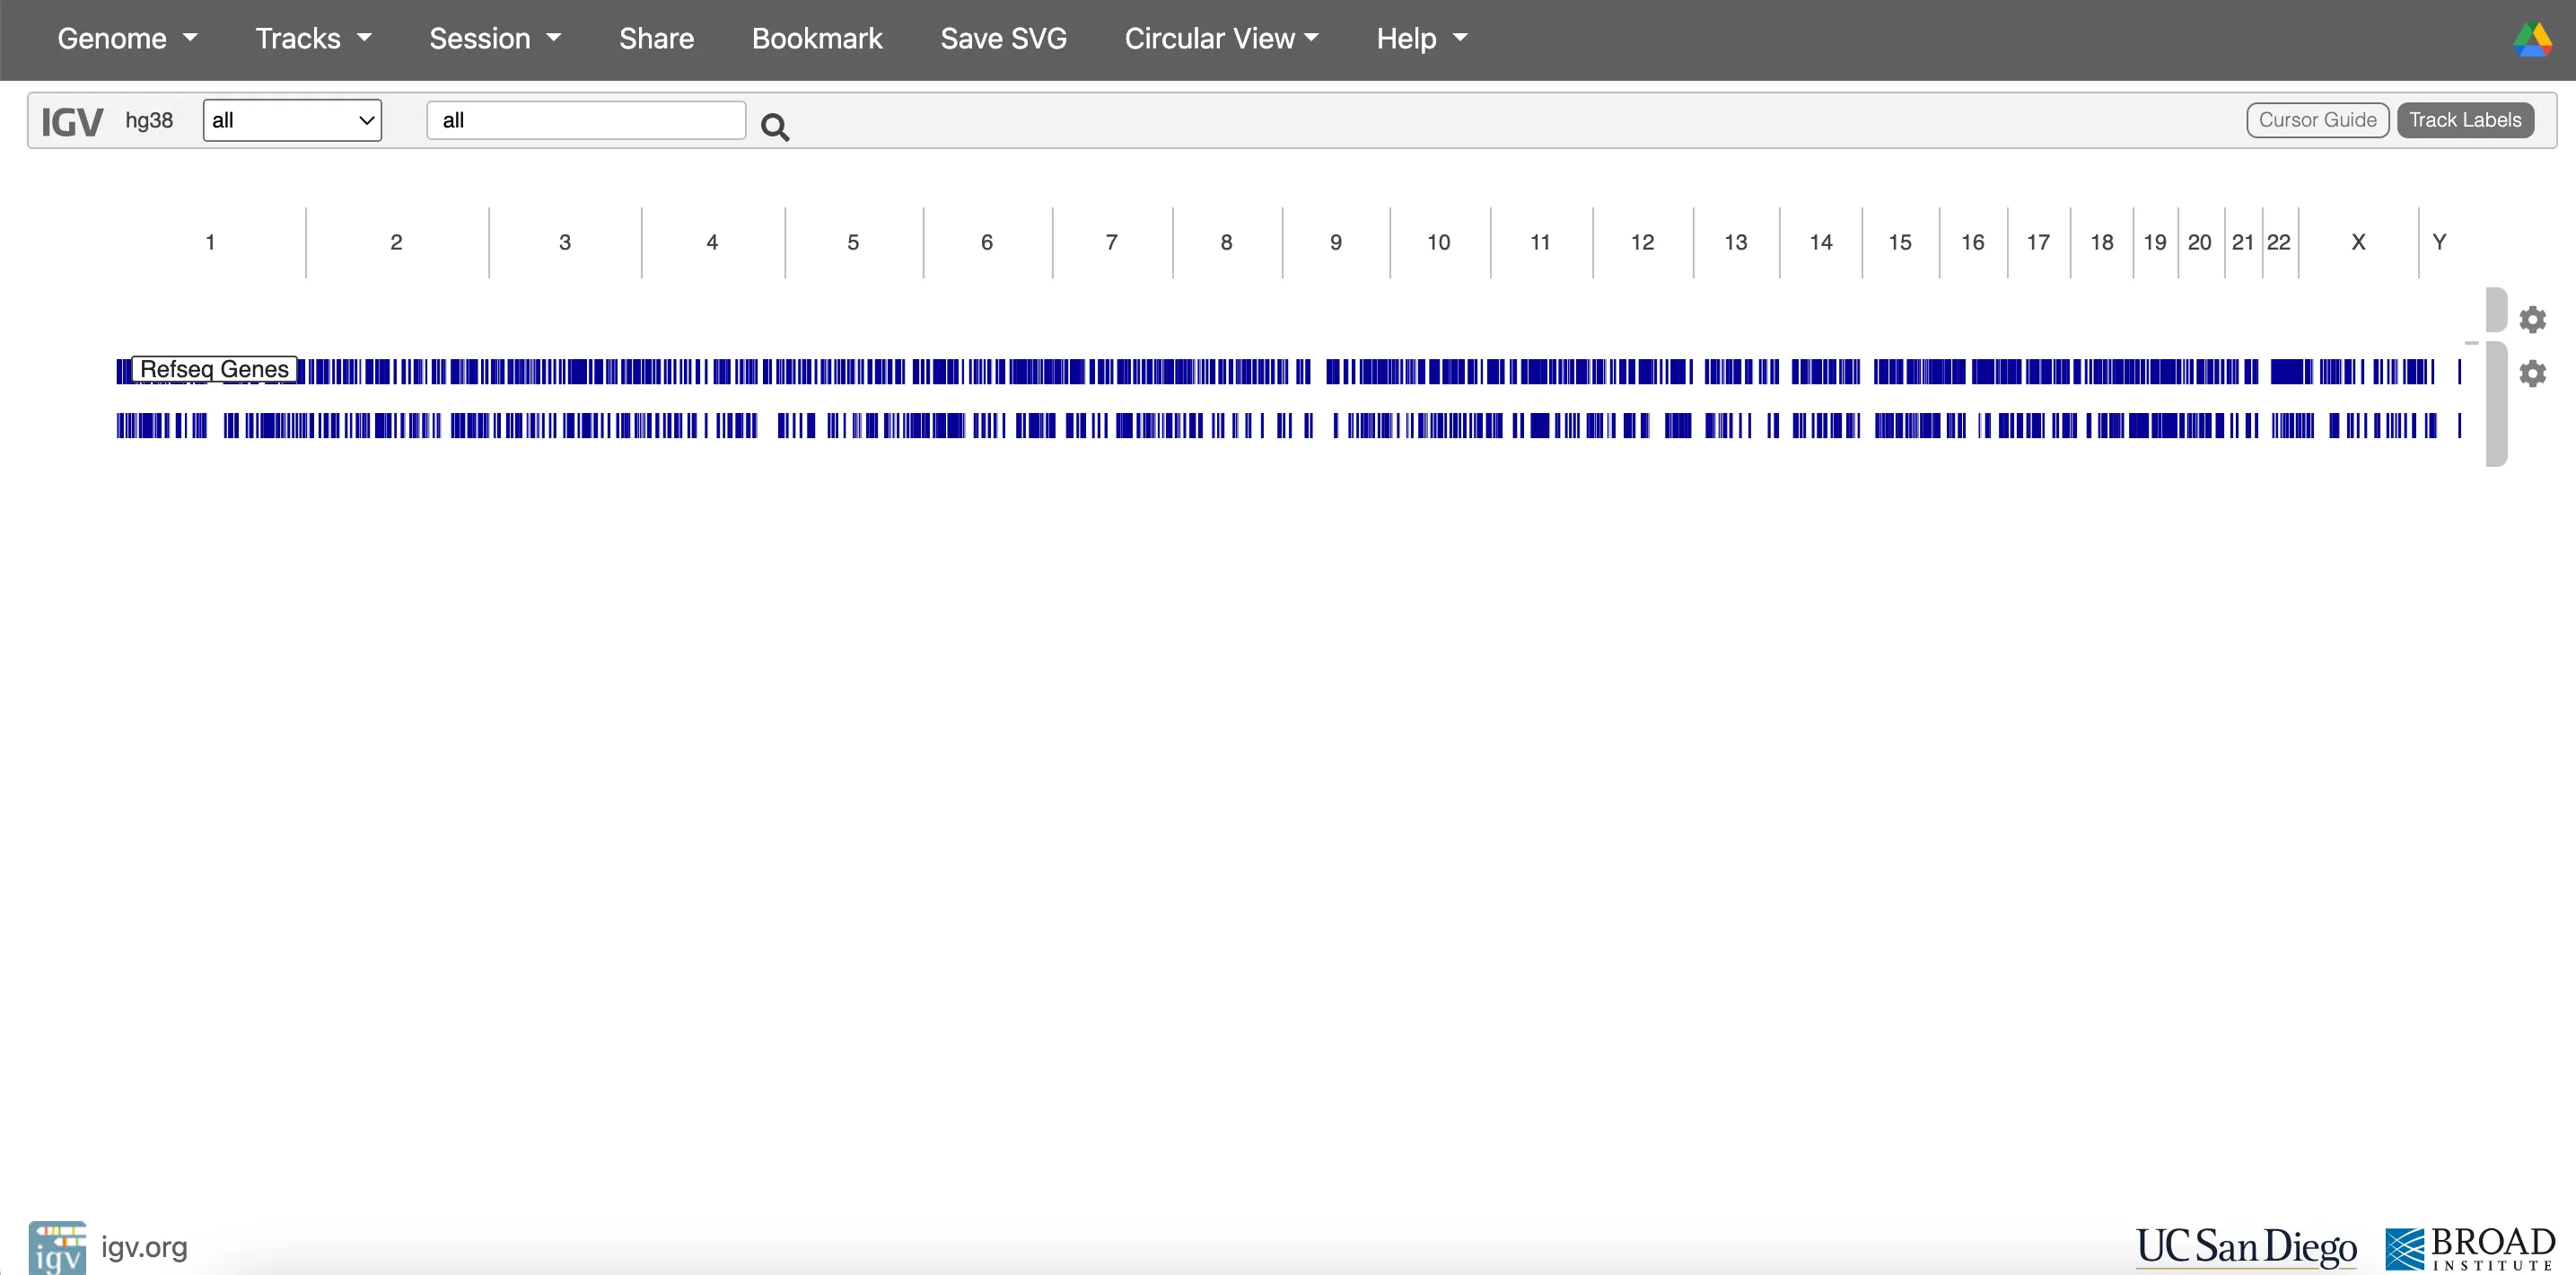 IGV genome and variant visualisation tool by the Broad Institute